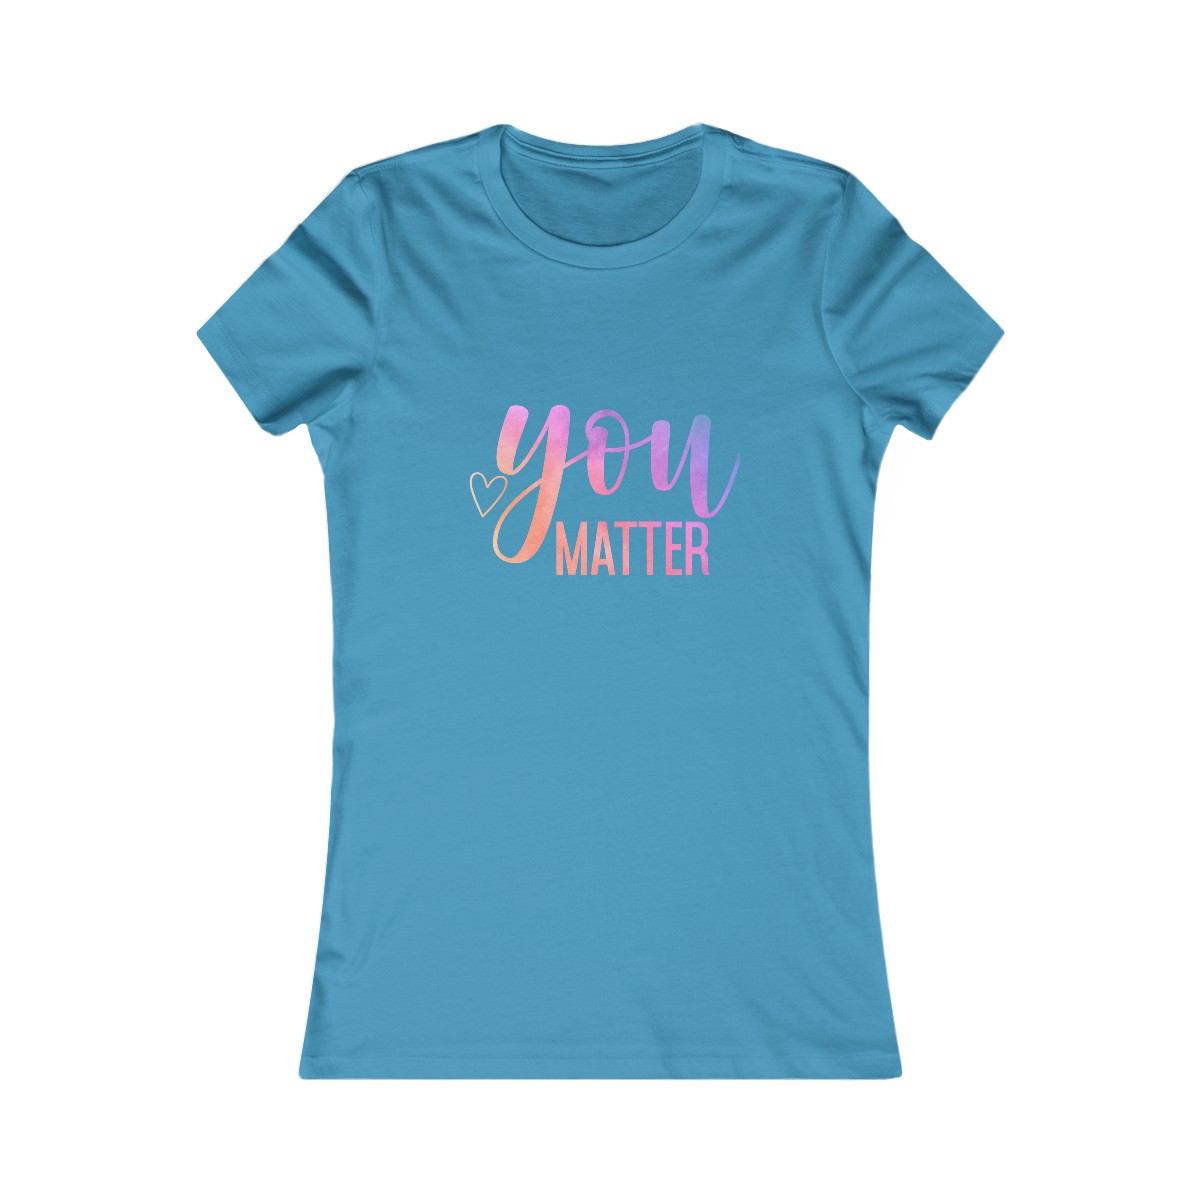 Always remember "You Matter!" This fitted shirt's motto is the perfect reminder, just in time for the #holidays! product main image